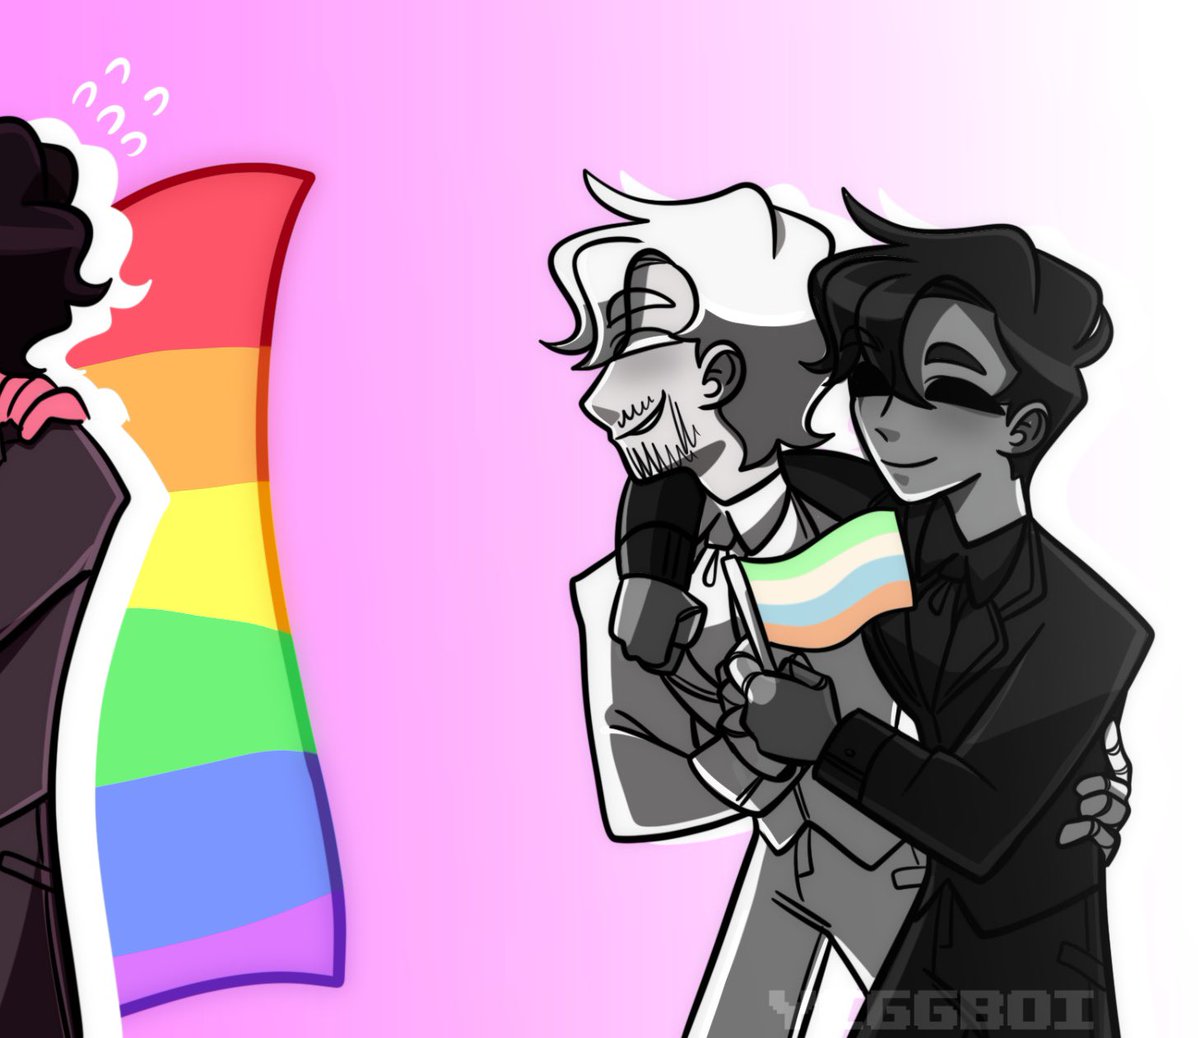 Woowwo gay people

Large pride post with some of my fave content creators and characters ^^
.
.
#markiplier #markiplierfanart #crankgameplays #jacksepticeye #jseegos #pride #iswm